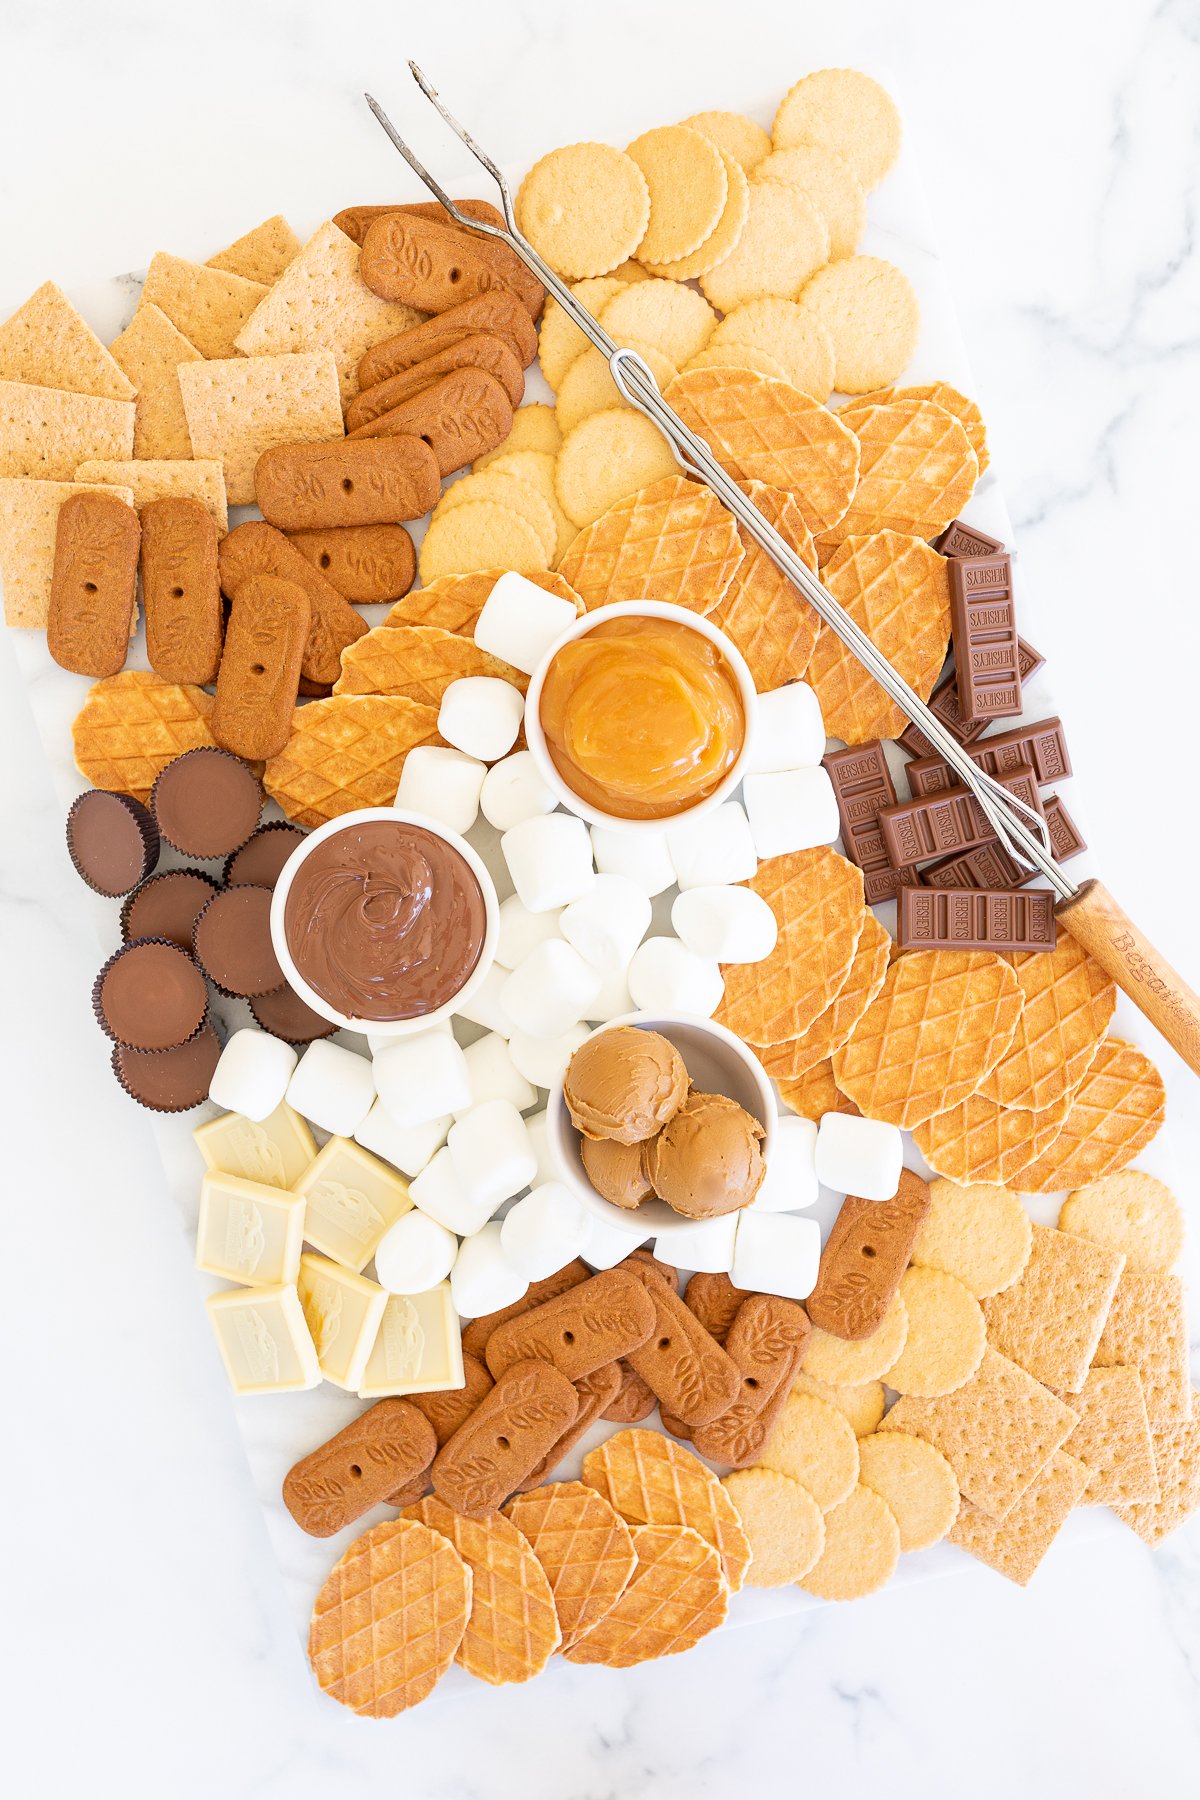 A s'mores charcuterie board filled with various marshmallows, cookies, crackers and dessert spreads.